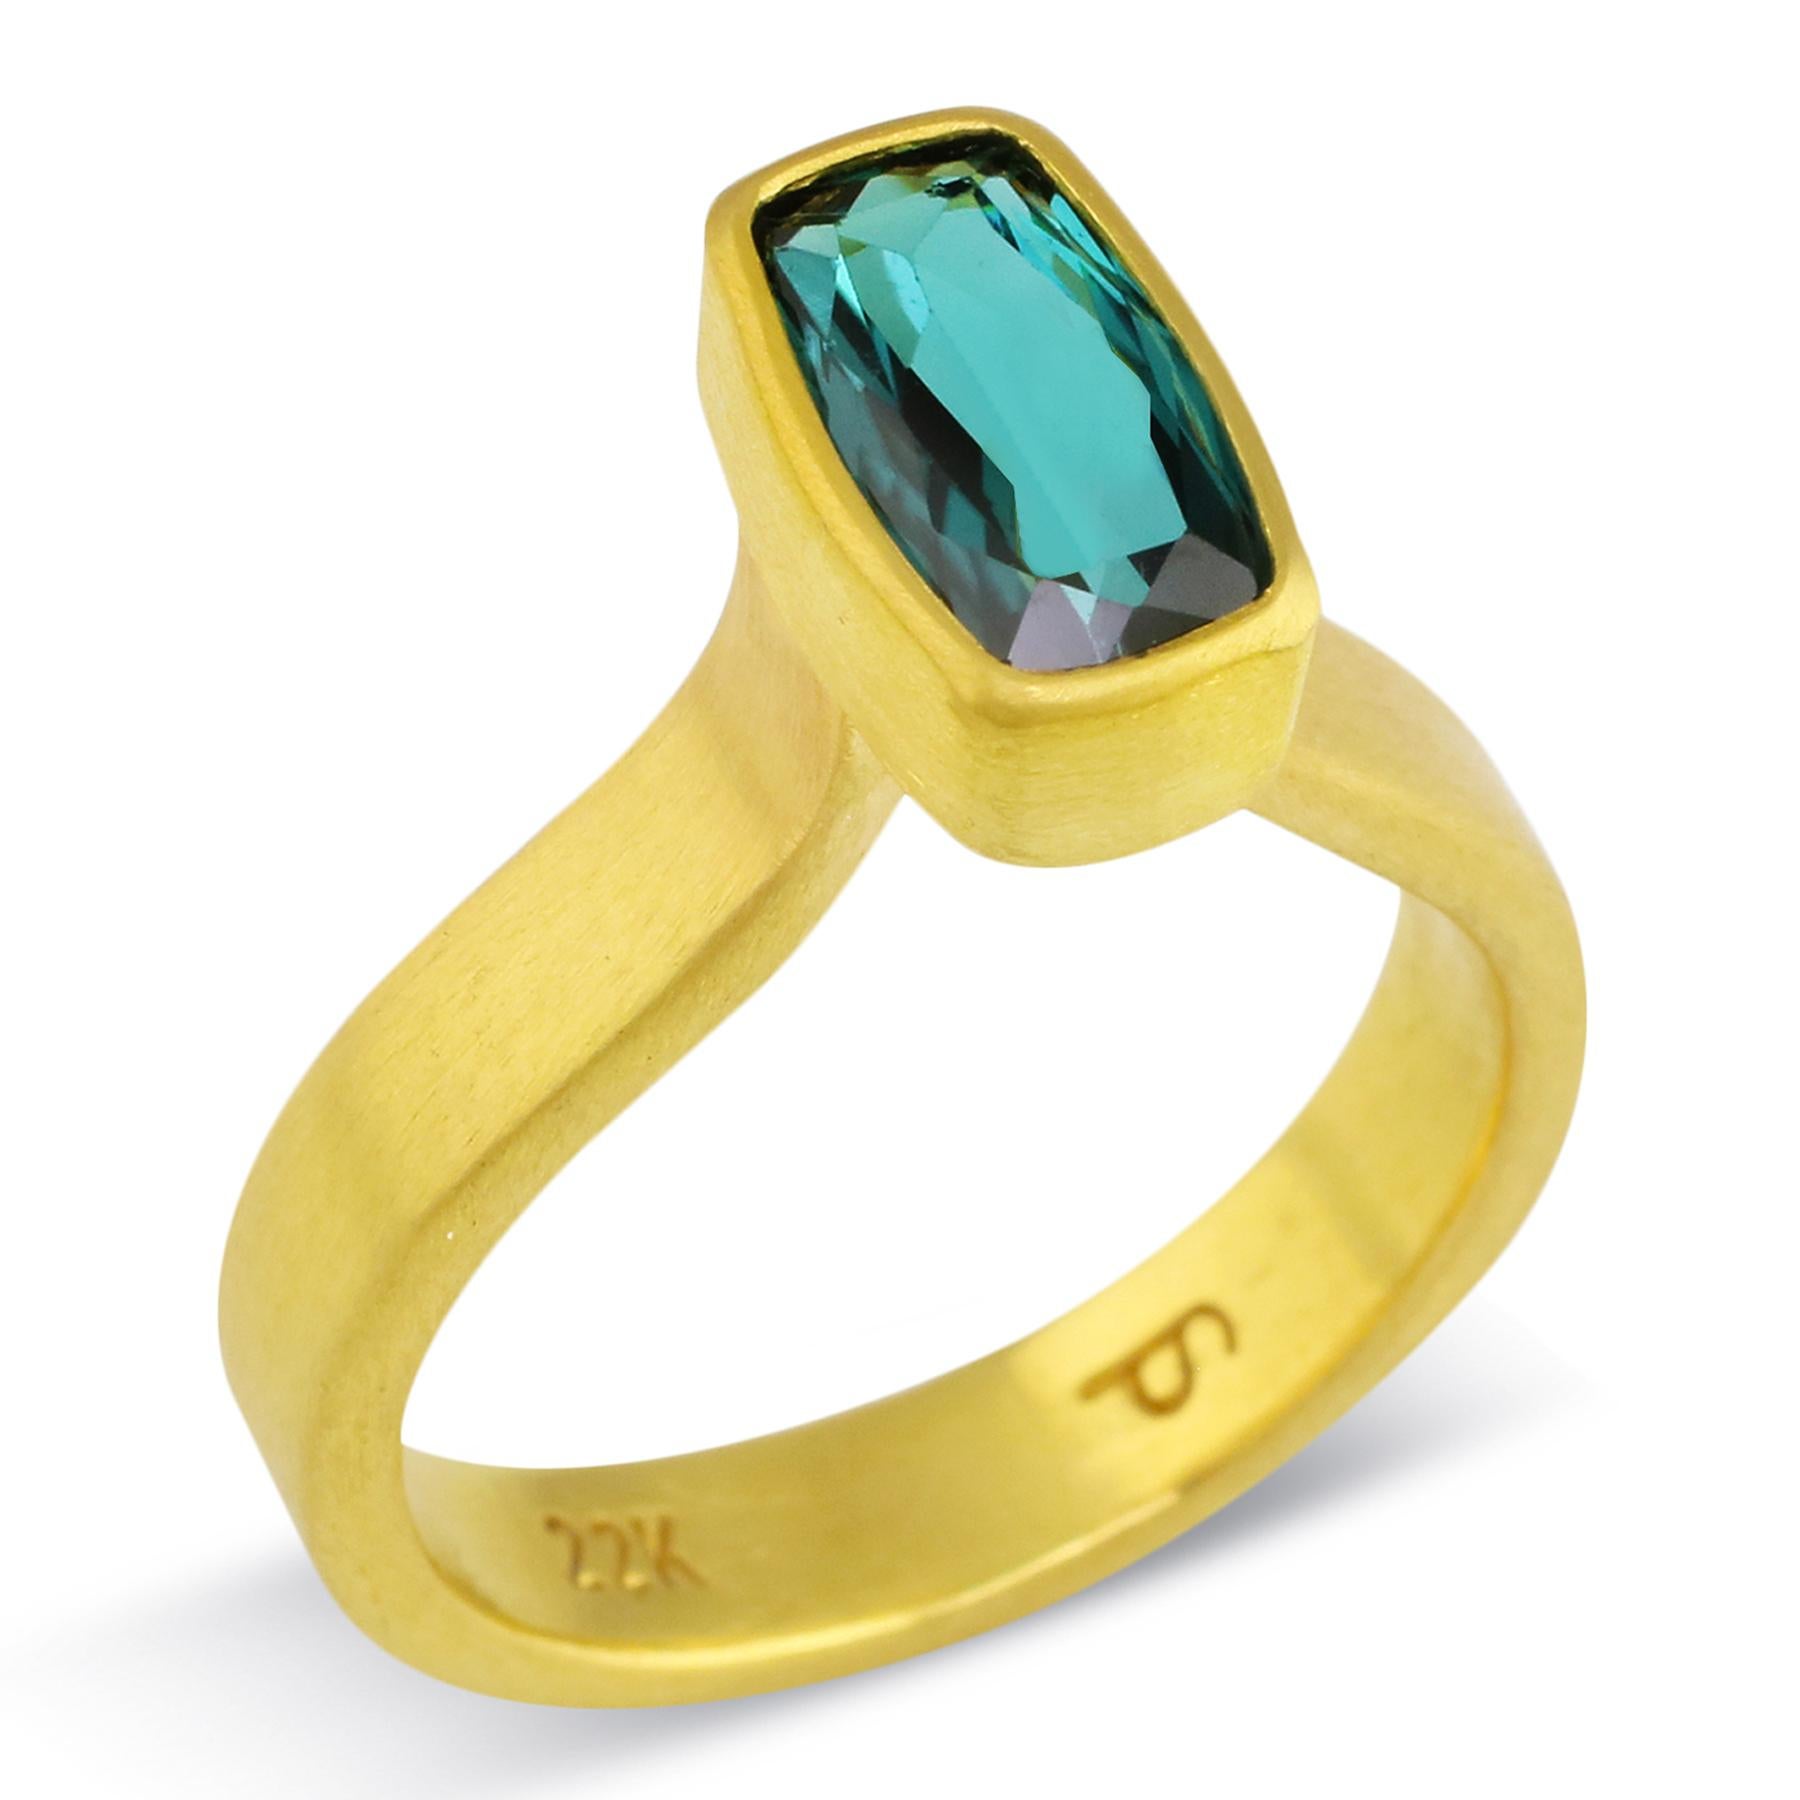 Artisan PHILIPPE SPENCER 1.6 Ct. Teal Tourmaline Statement Ring in 22K Gold For Sale